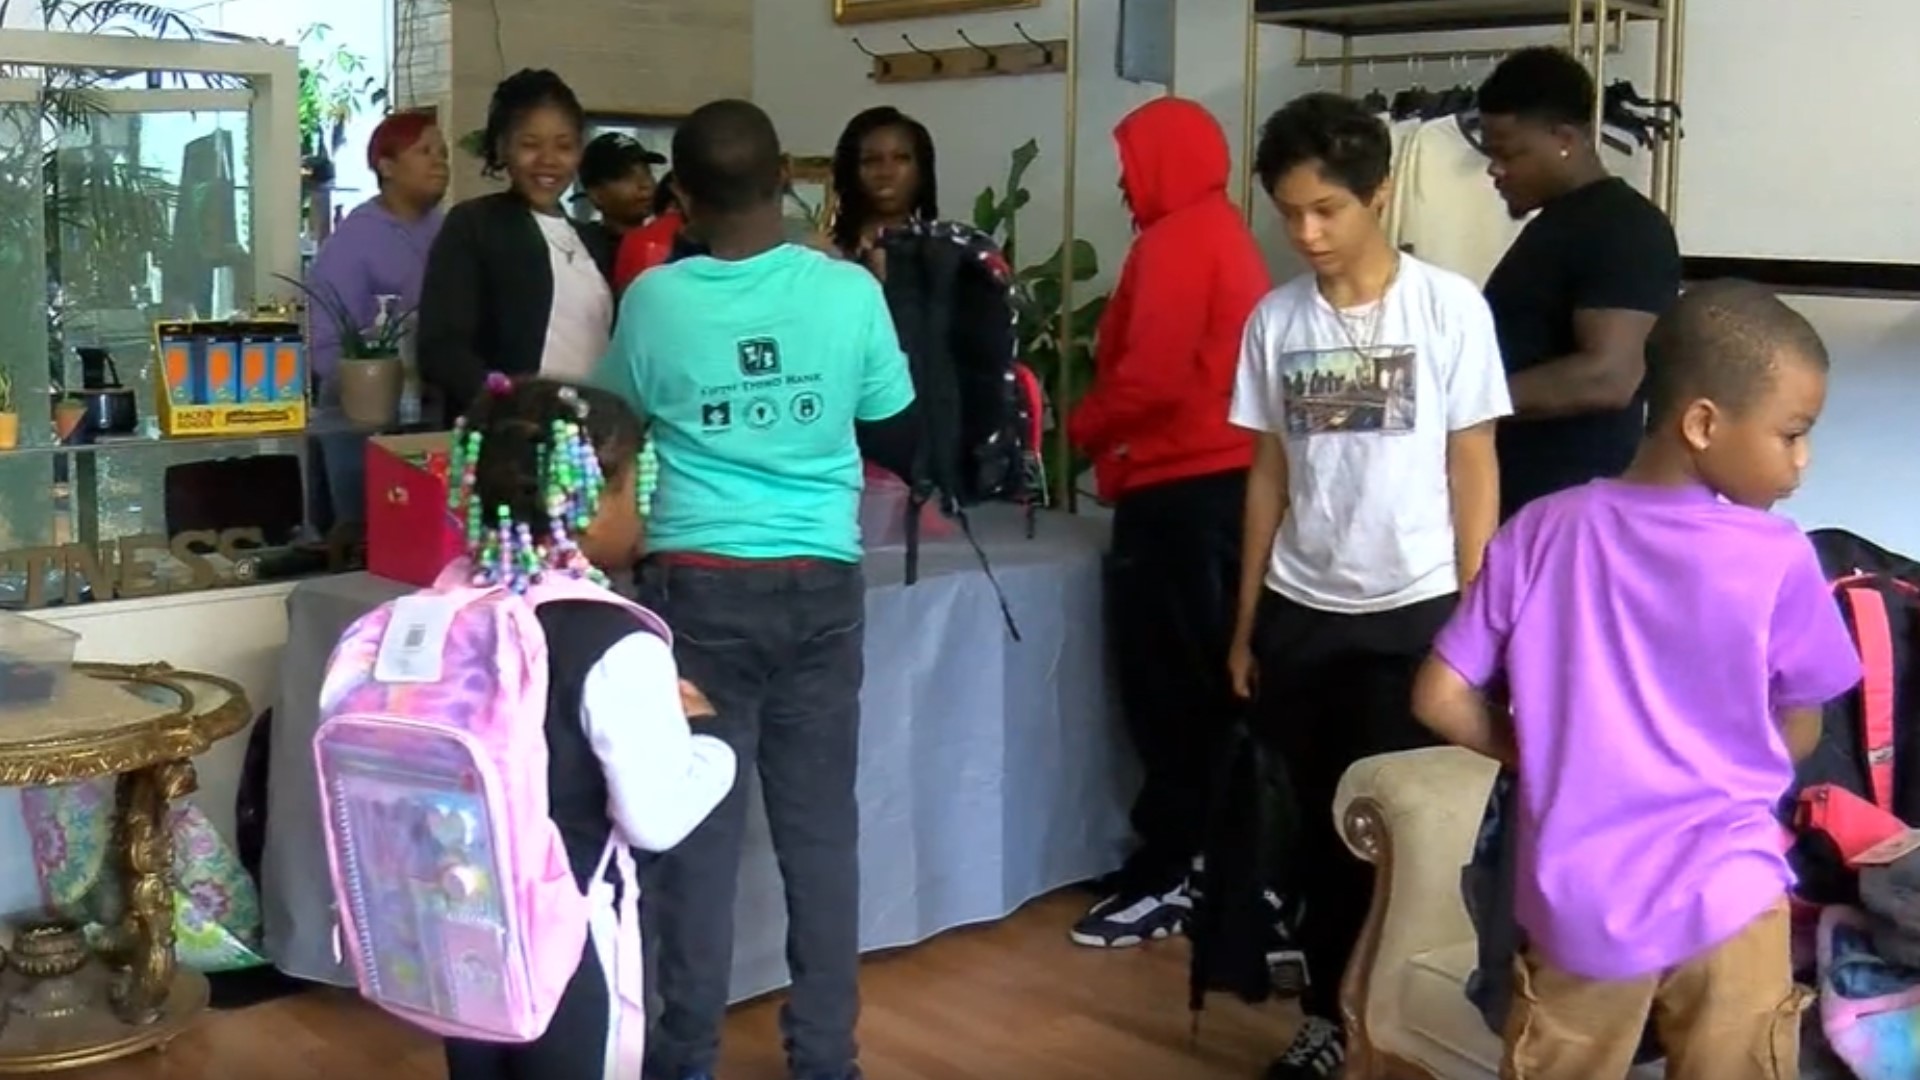 1st Dibz Barbershop handed out 300 backpacks in its first community giveaway.